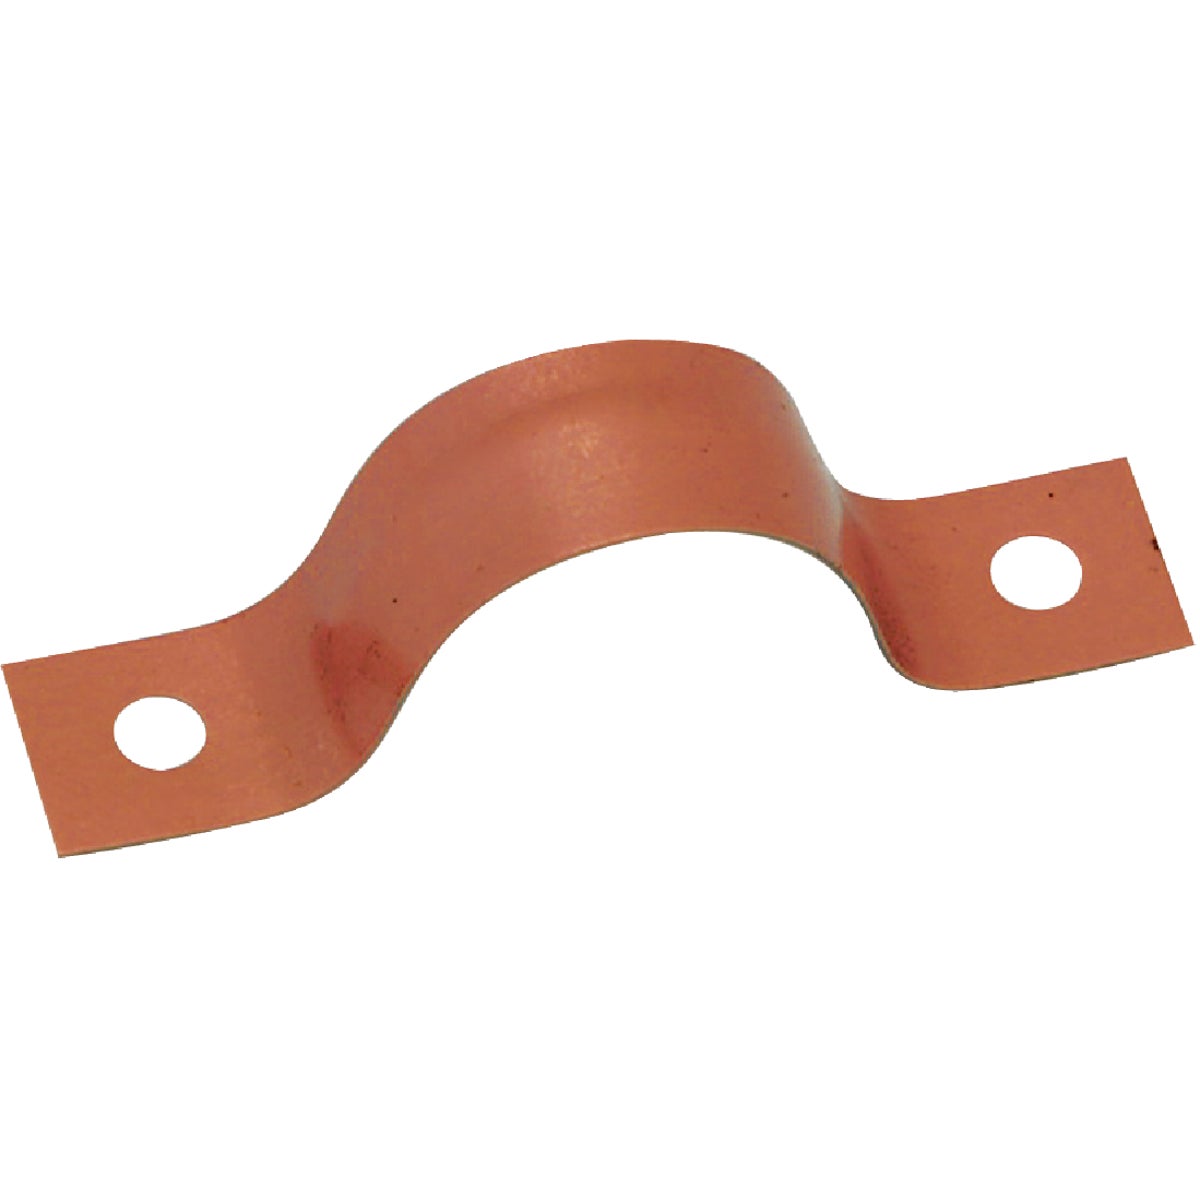 Item 403272, Copper coated steel, 2-hole pipe straps.